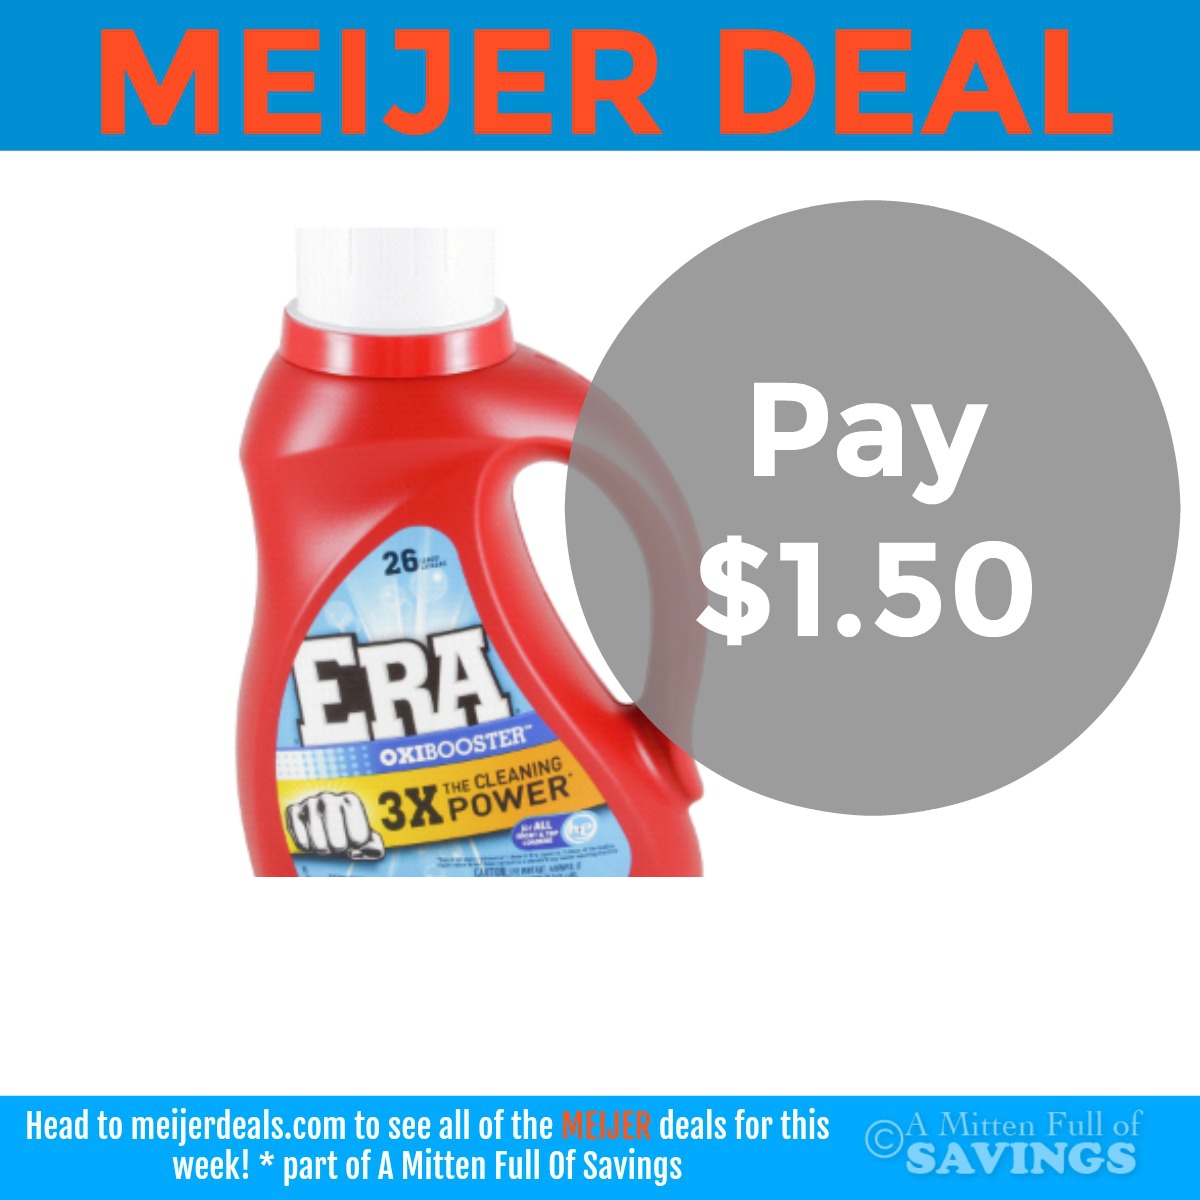 Meijer: ERA Laundry Detergent $1.50 This Weekend Only